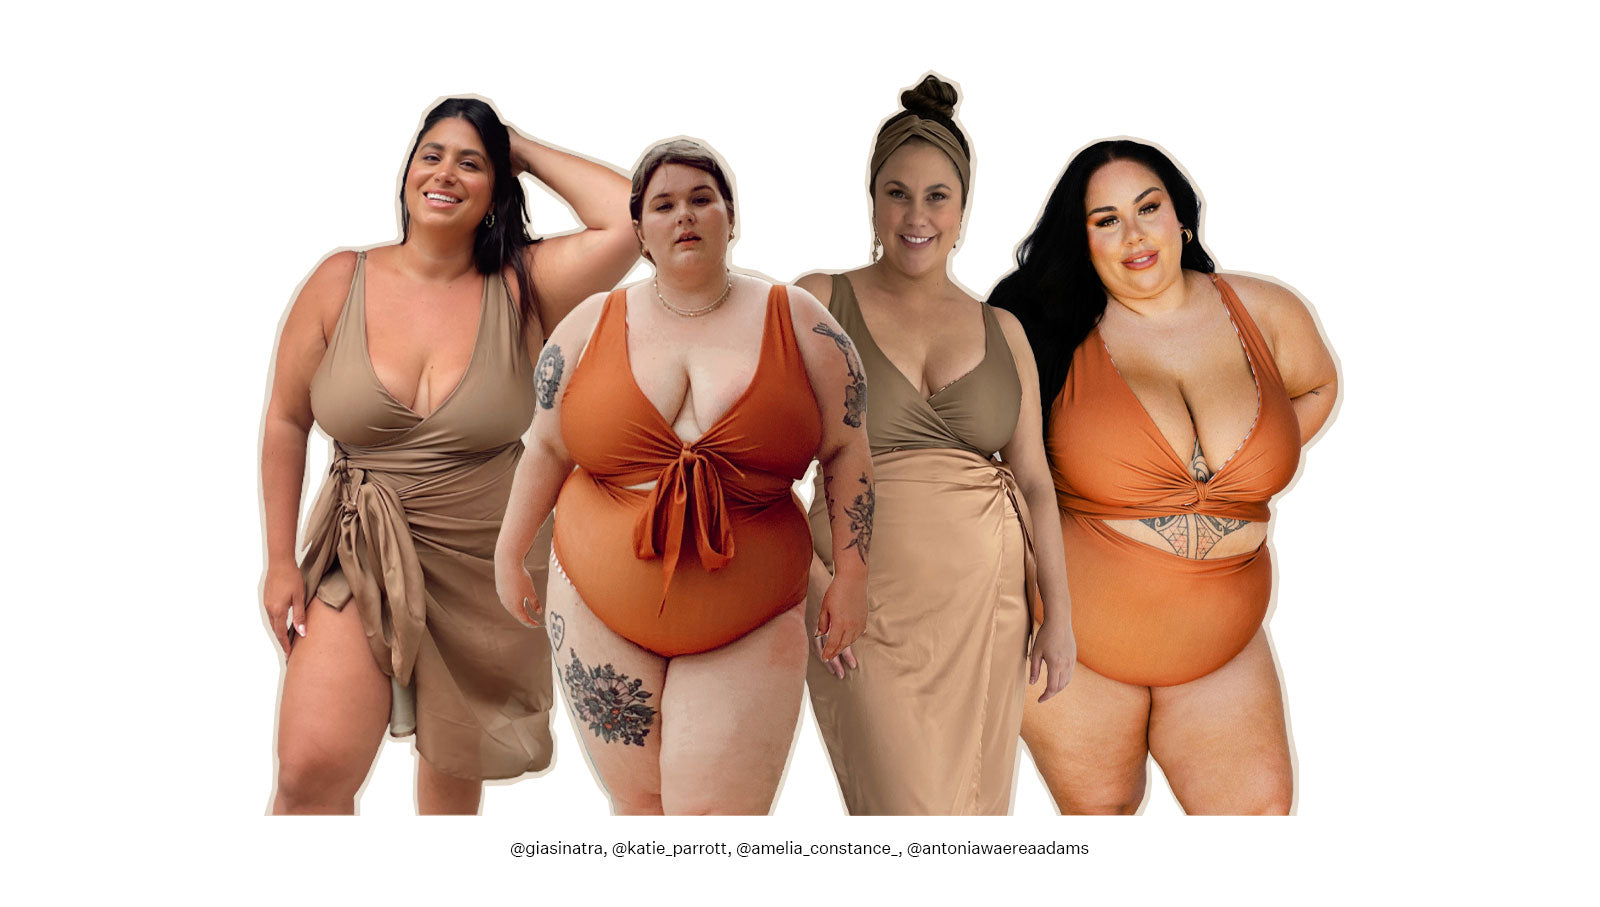 Are Baiia reversible swimsuits suitable for large busts? – Baiia Swimwear